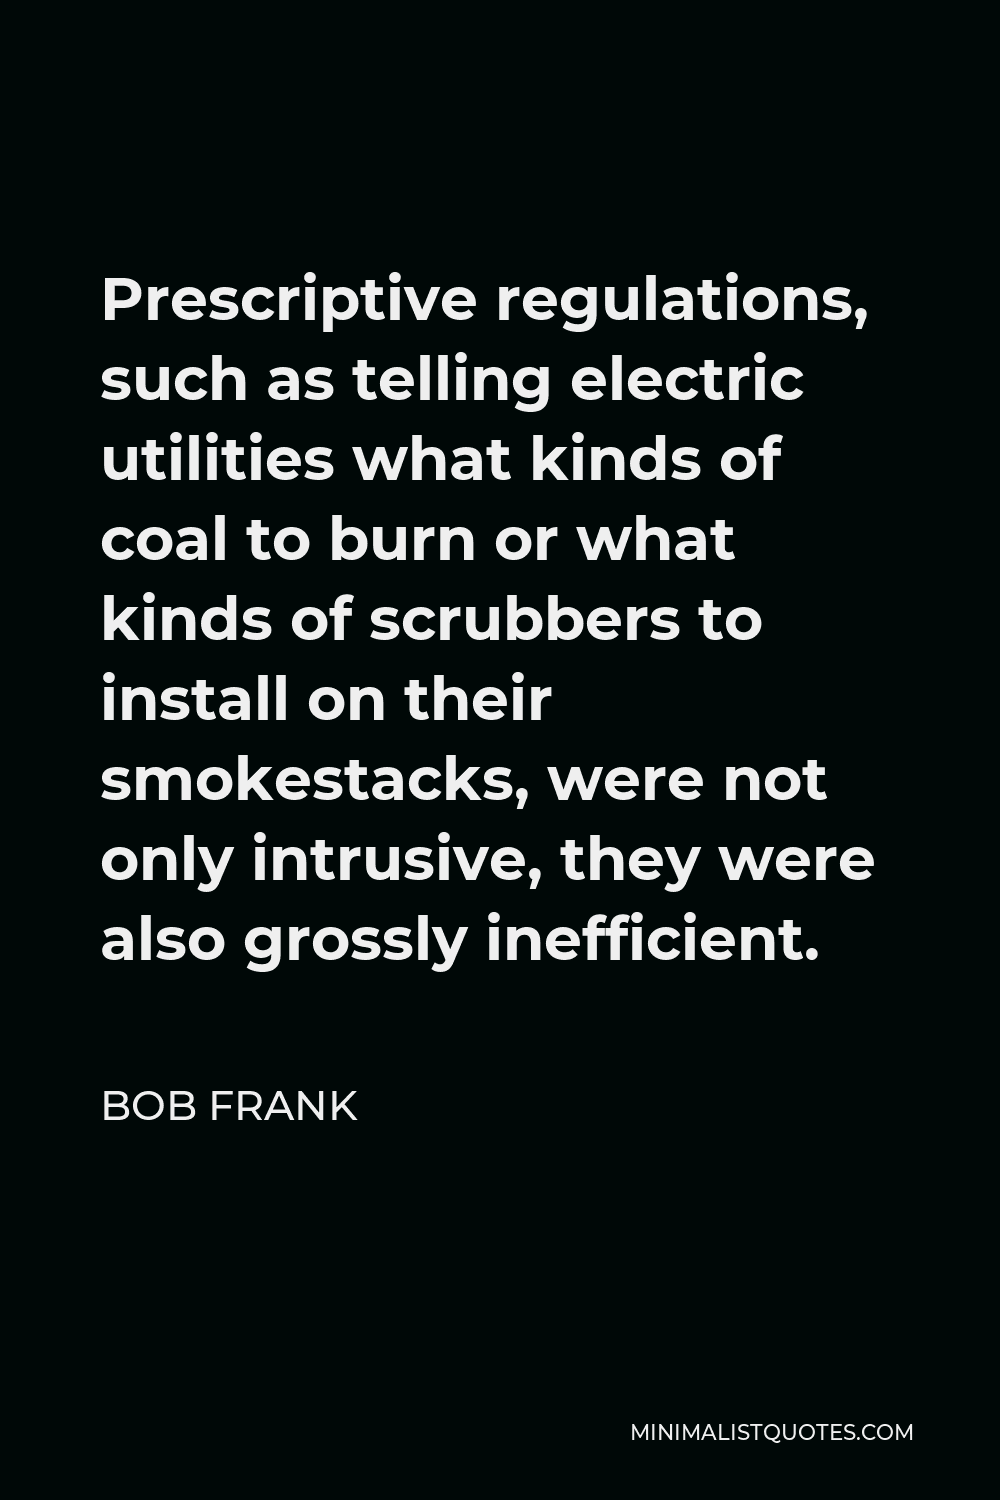 Bob Frank Quote - Prescriptive regulations, such as telling electric utilities what kinds of coal to burn or what kinds of scrubbers to install on their smokestacks, were not only intrusive, they were also grossly inefficient.